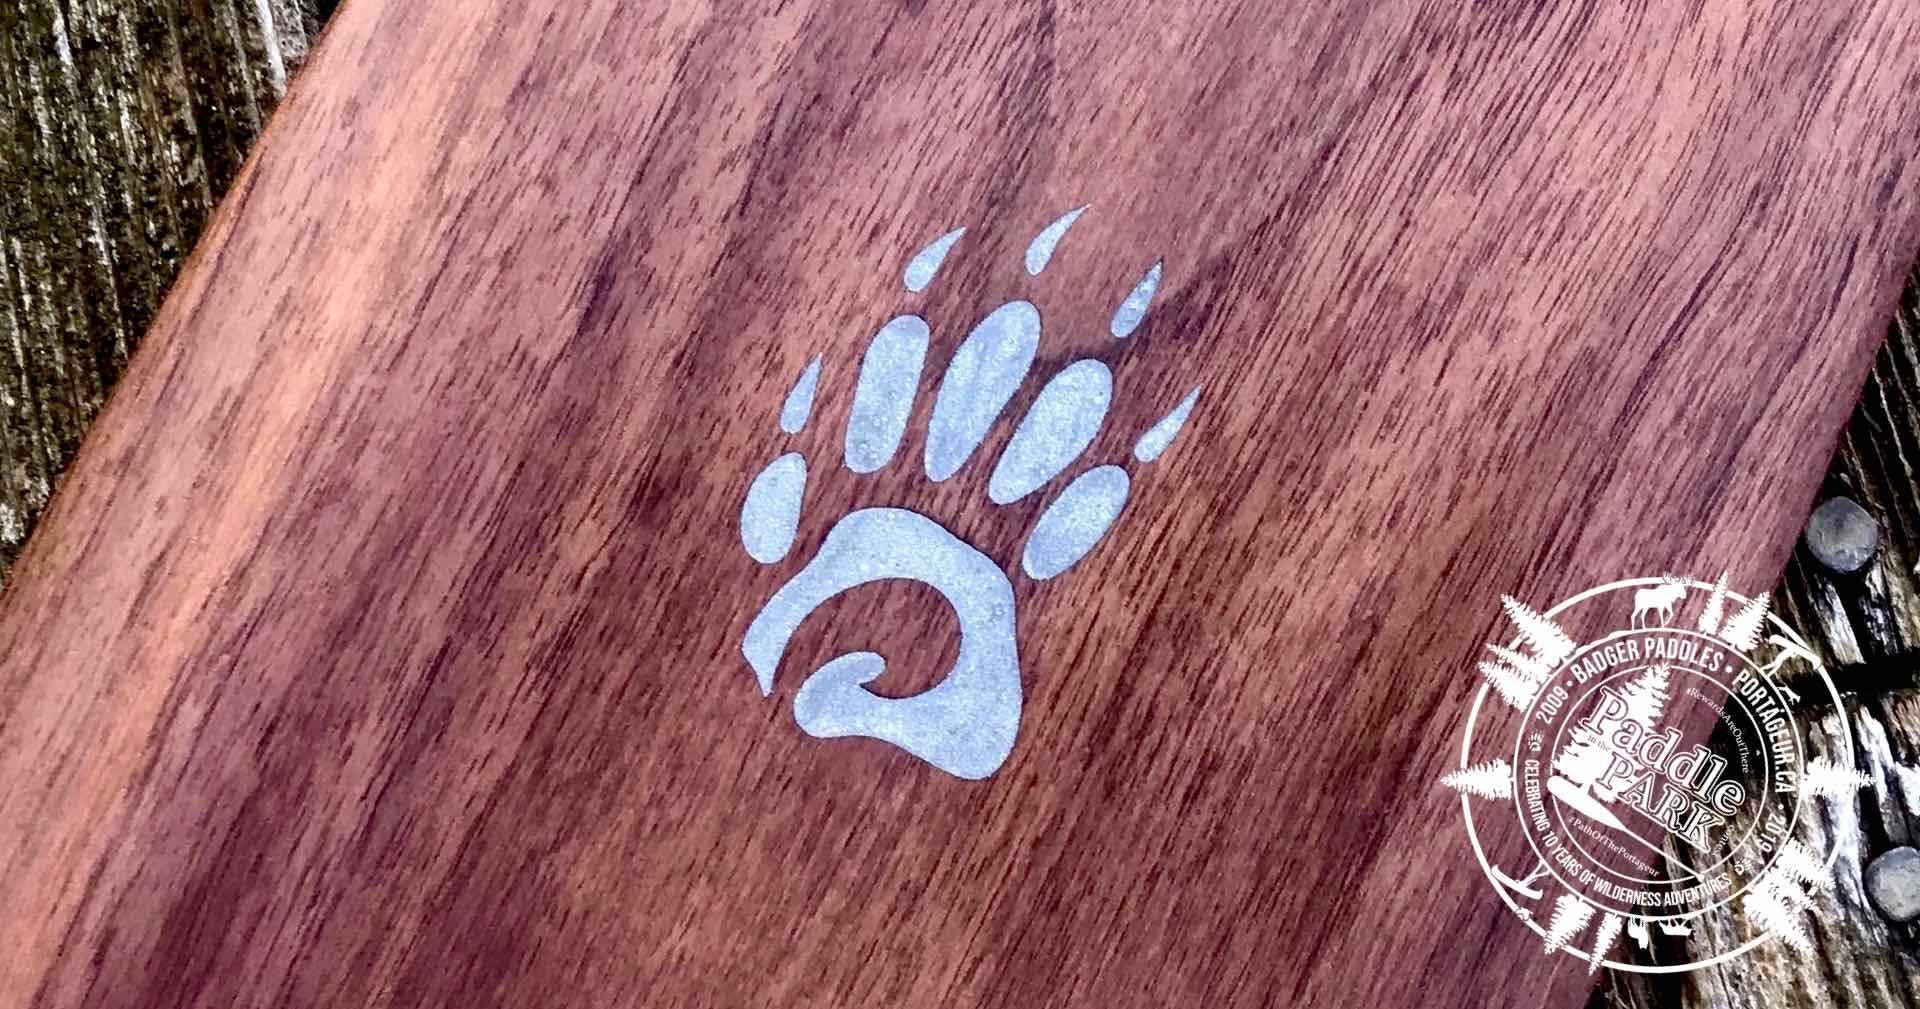 Special Edition Limited Issue Walnut Badger Canoe Paddle with laser engraved aluminum inlay Badger paw logo on rustic wood background